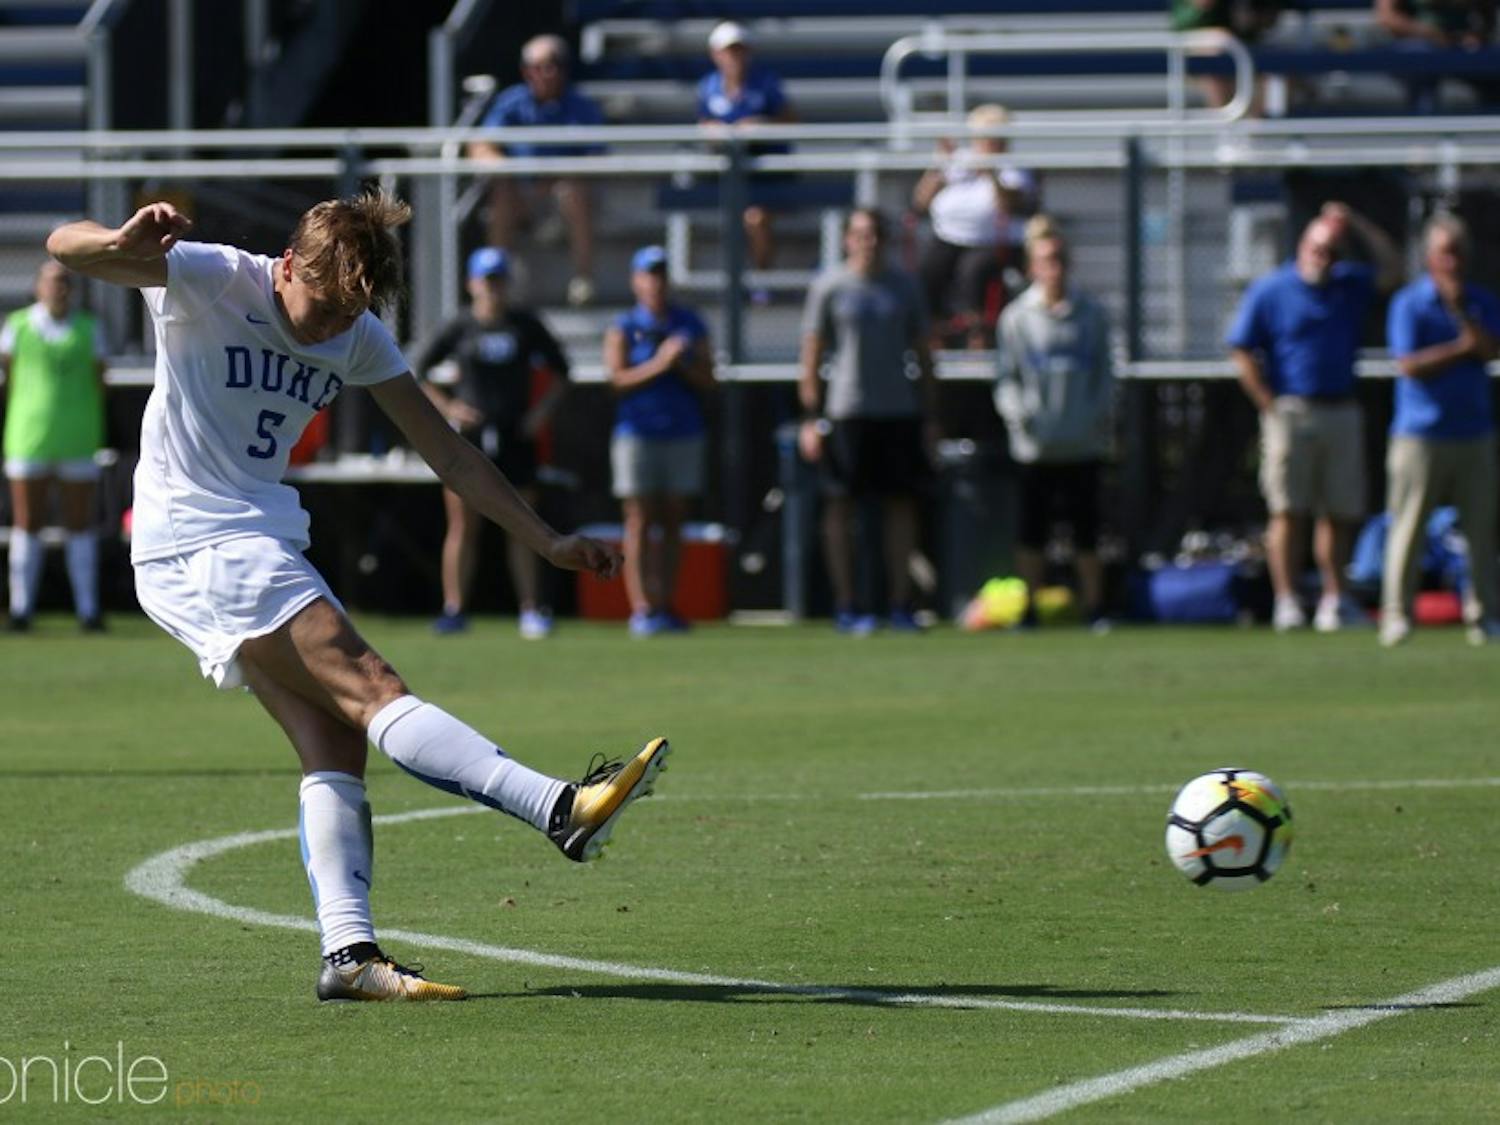 Rebecca Quinn will return to the field for the Blue Devils this weekend after missing the last three games to play for the Canadian National Team.